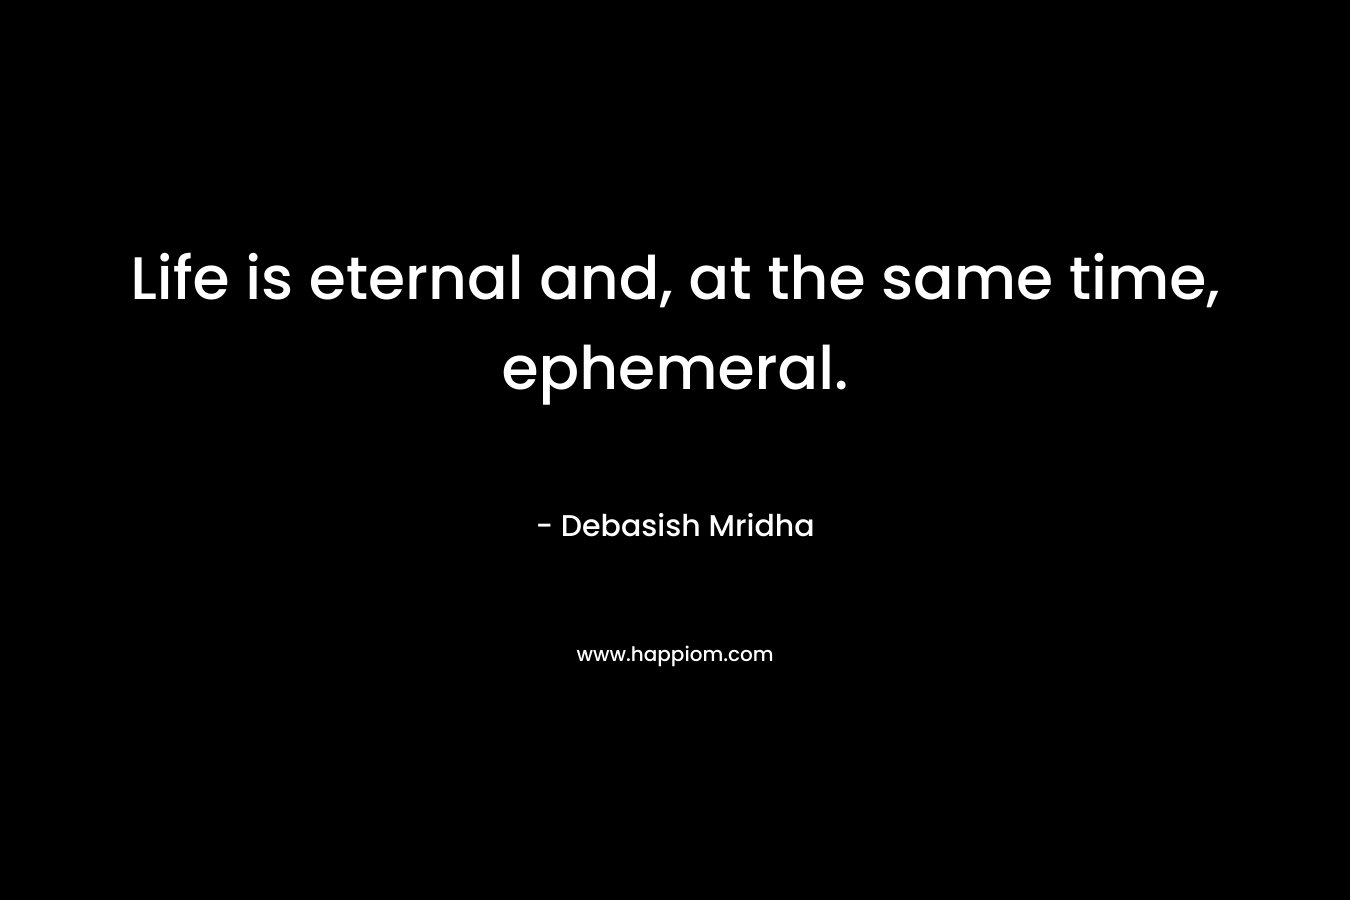 Life is eternal and, at the same time, ephemeral.